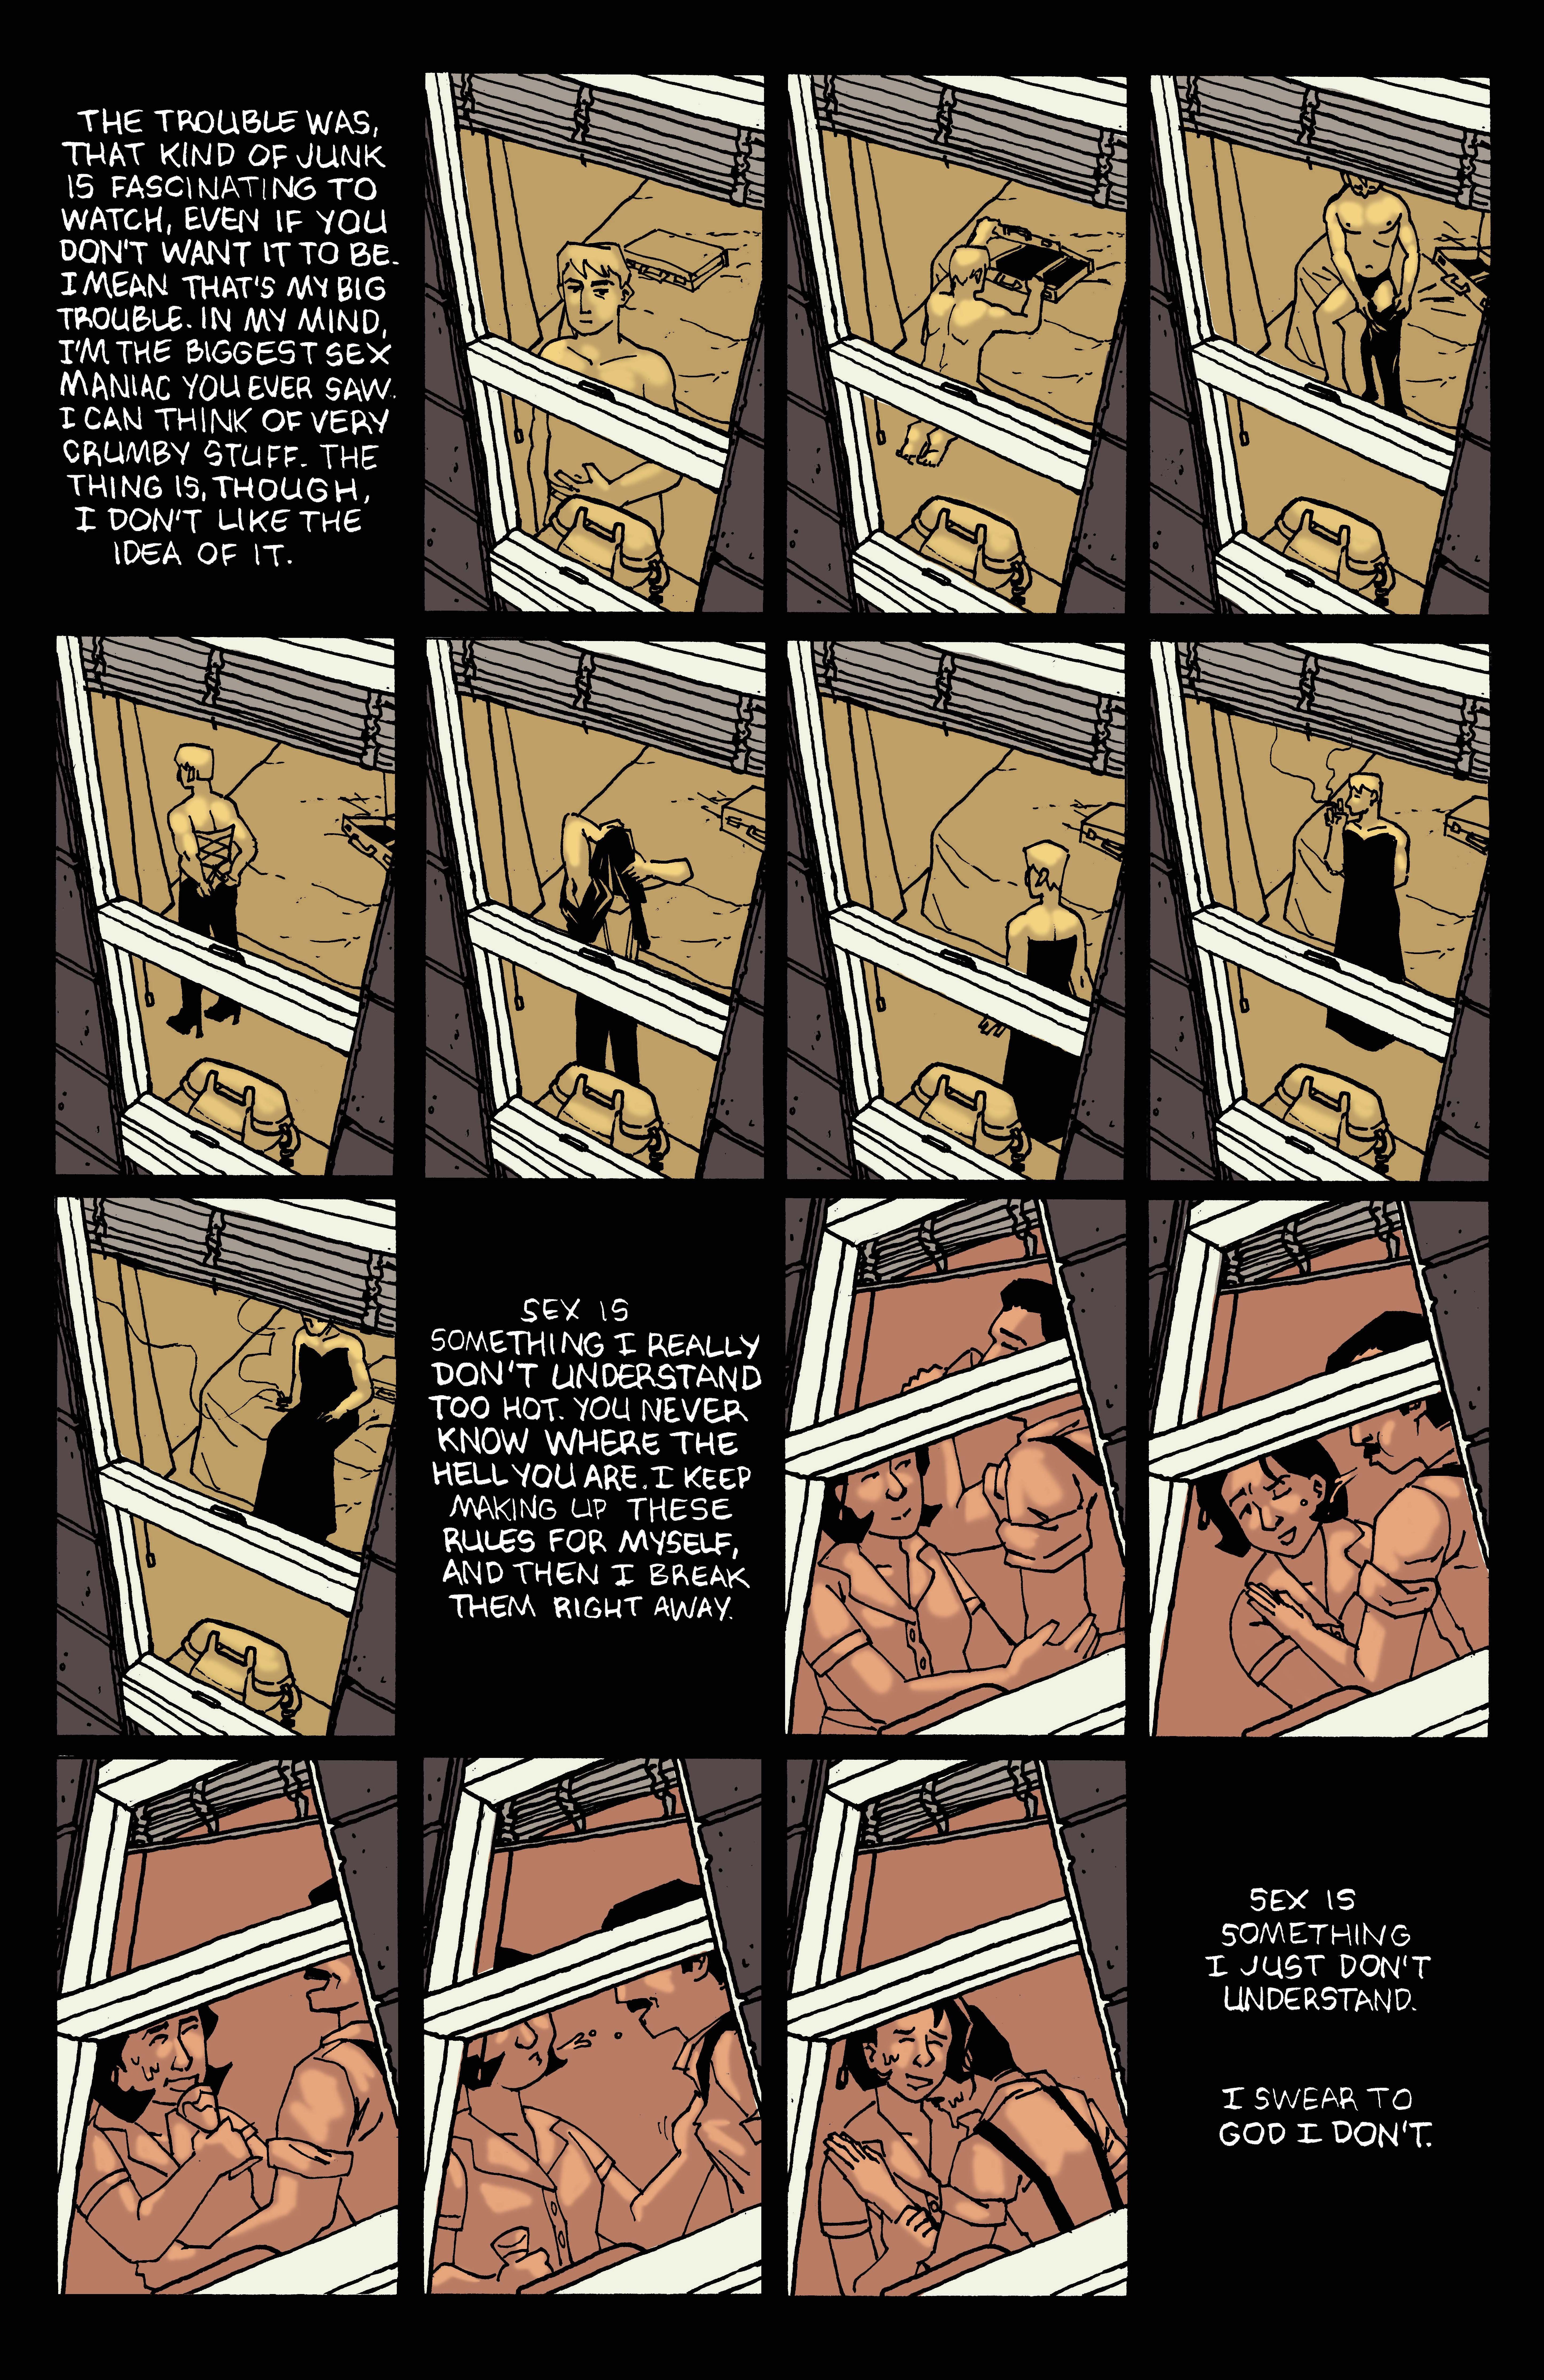 A comics page that depicts two sequences from two different views through windows of a hotel. In the first sequence, a naked man looks out of the window, then puts on a long black gown and looks in the mirror before lighting a cigarette and sitting down on the bed. In the second sequence, a young couple take turns taking sips of their drinks and spitting them in each others faces. They laugh and fall into each others arms. The narration, which is an excerpt from J.D. Salinger's The Catcher in the Rye, reads: The trouble was, that kind of junk is fascinating to watch, even if you don't want it to be. I mean that's my big trouble. In my mind, I'm the biggest sex maniac you ever saw. I can think of very crumby stuff. The thing is, though, I don't like the idea of it. Sex is something I don't understand too hot. You never know where you are. I keep making up these rules for myself, and then I break them right away. Sex is something I just don't understand. I swear to God I dont.